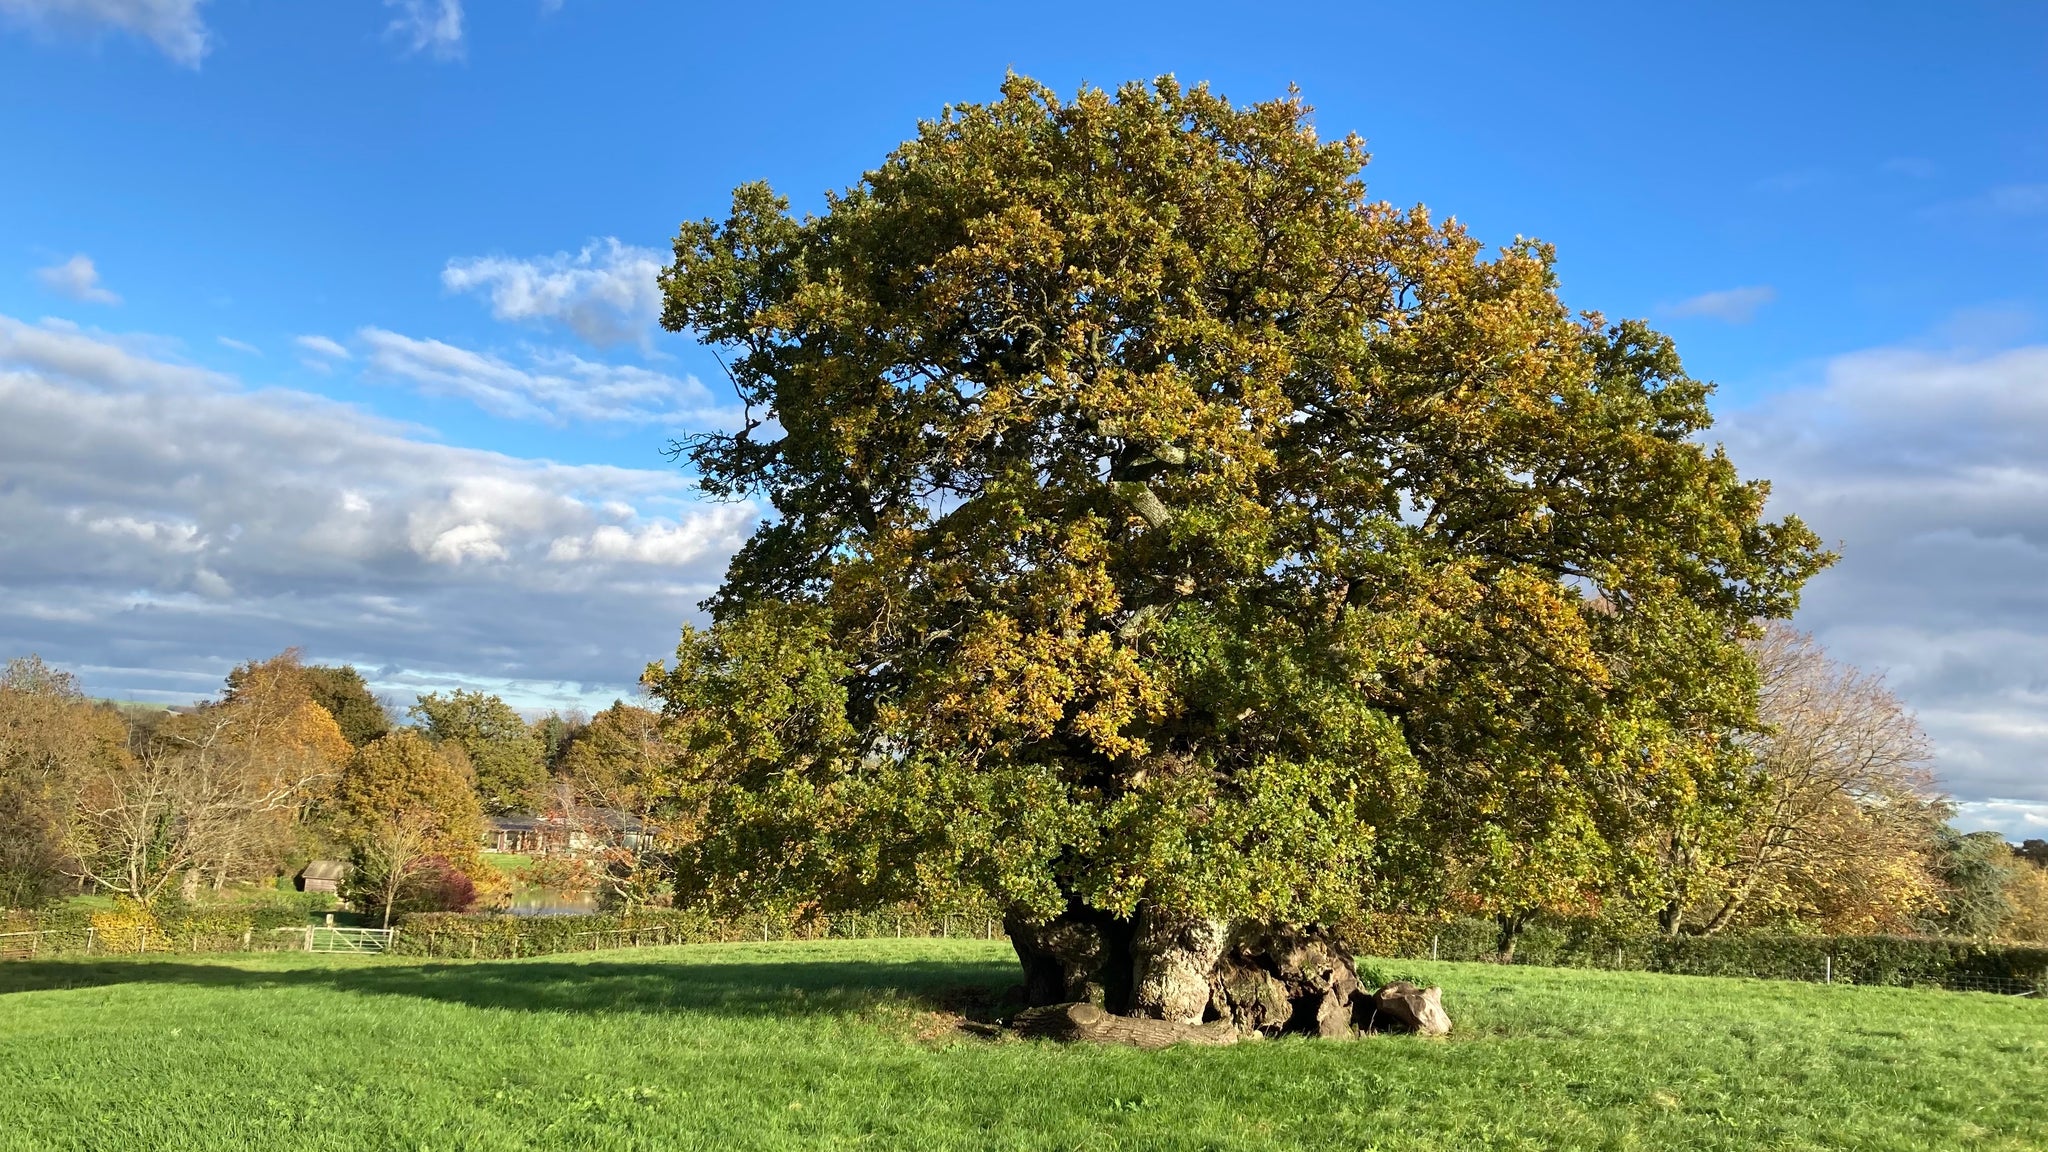 A field with Judge Wyndham’s Oak in the middle